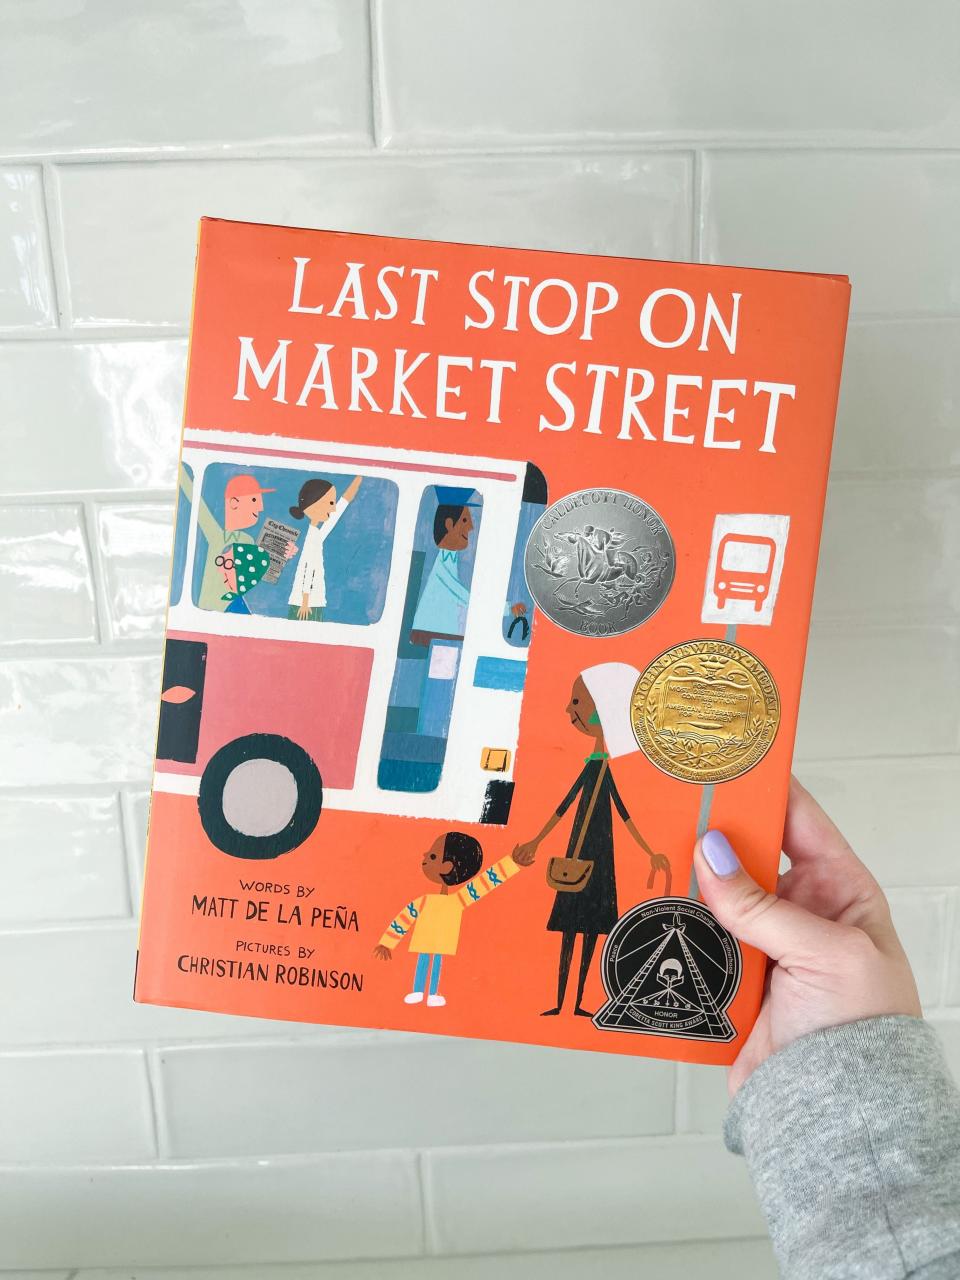 "Last Stop on Market Street" is the Little Read Lakeshore book this year.